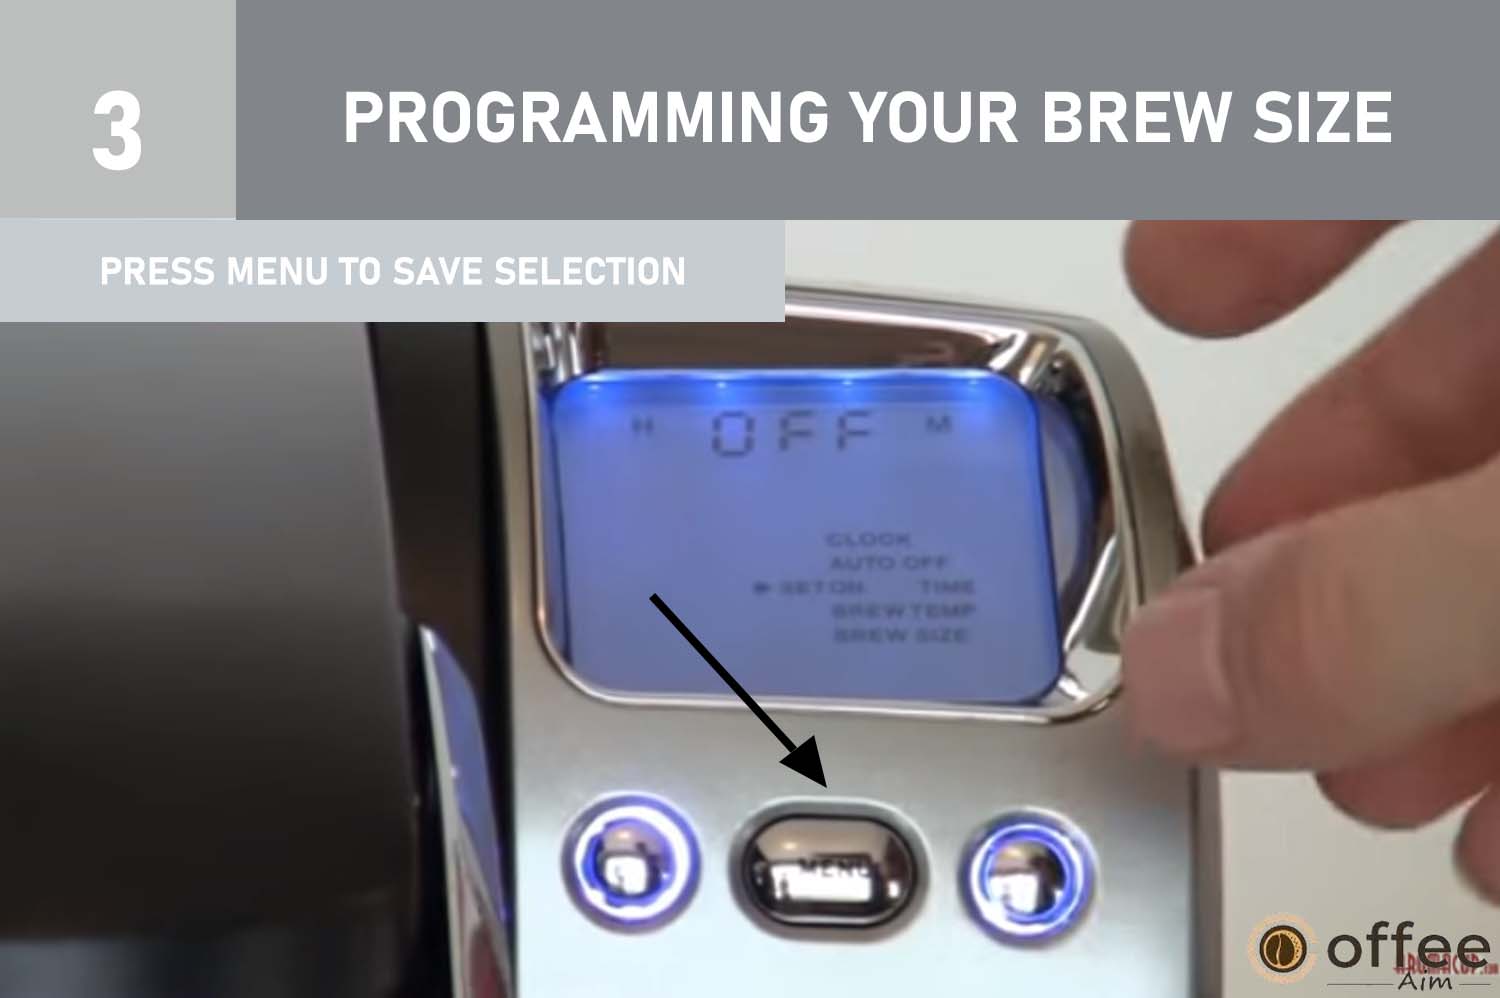 After selecting your preferred brew size, press the MENU Button once to exit the settings menu. The LCD screen will show the newly set default brew size.